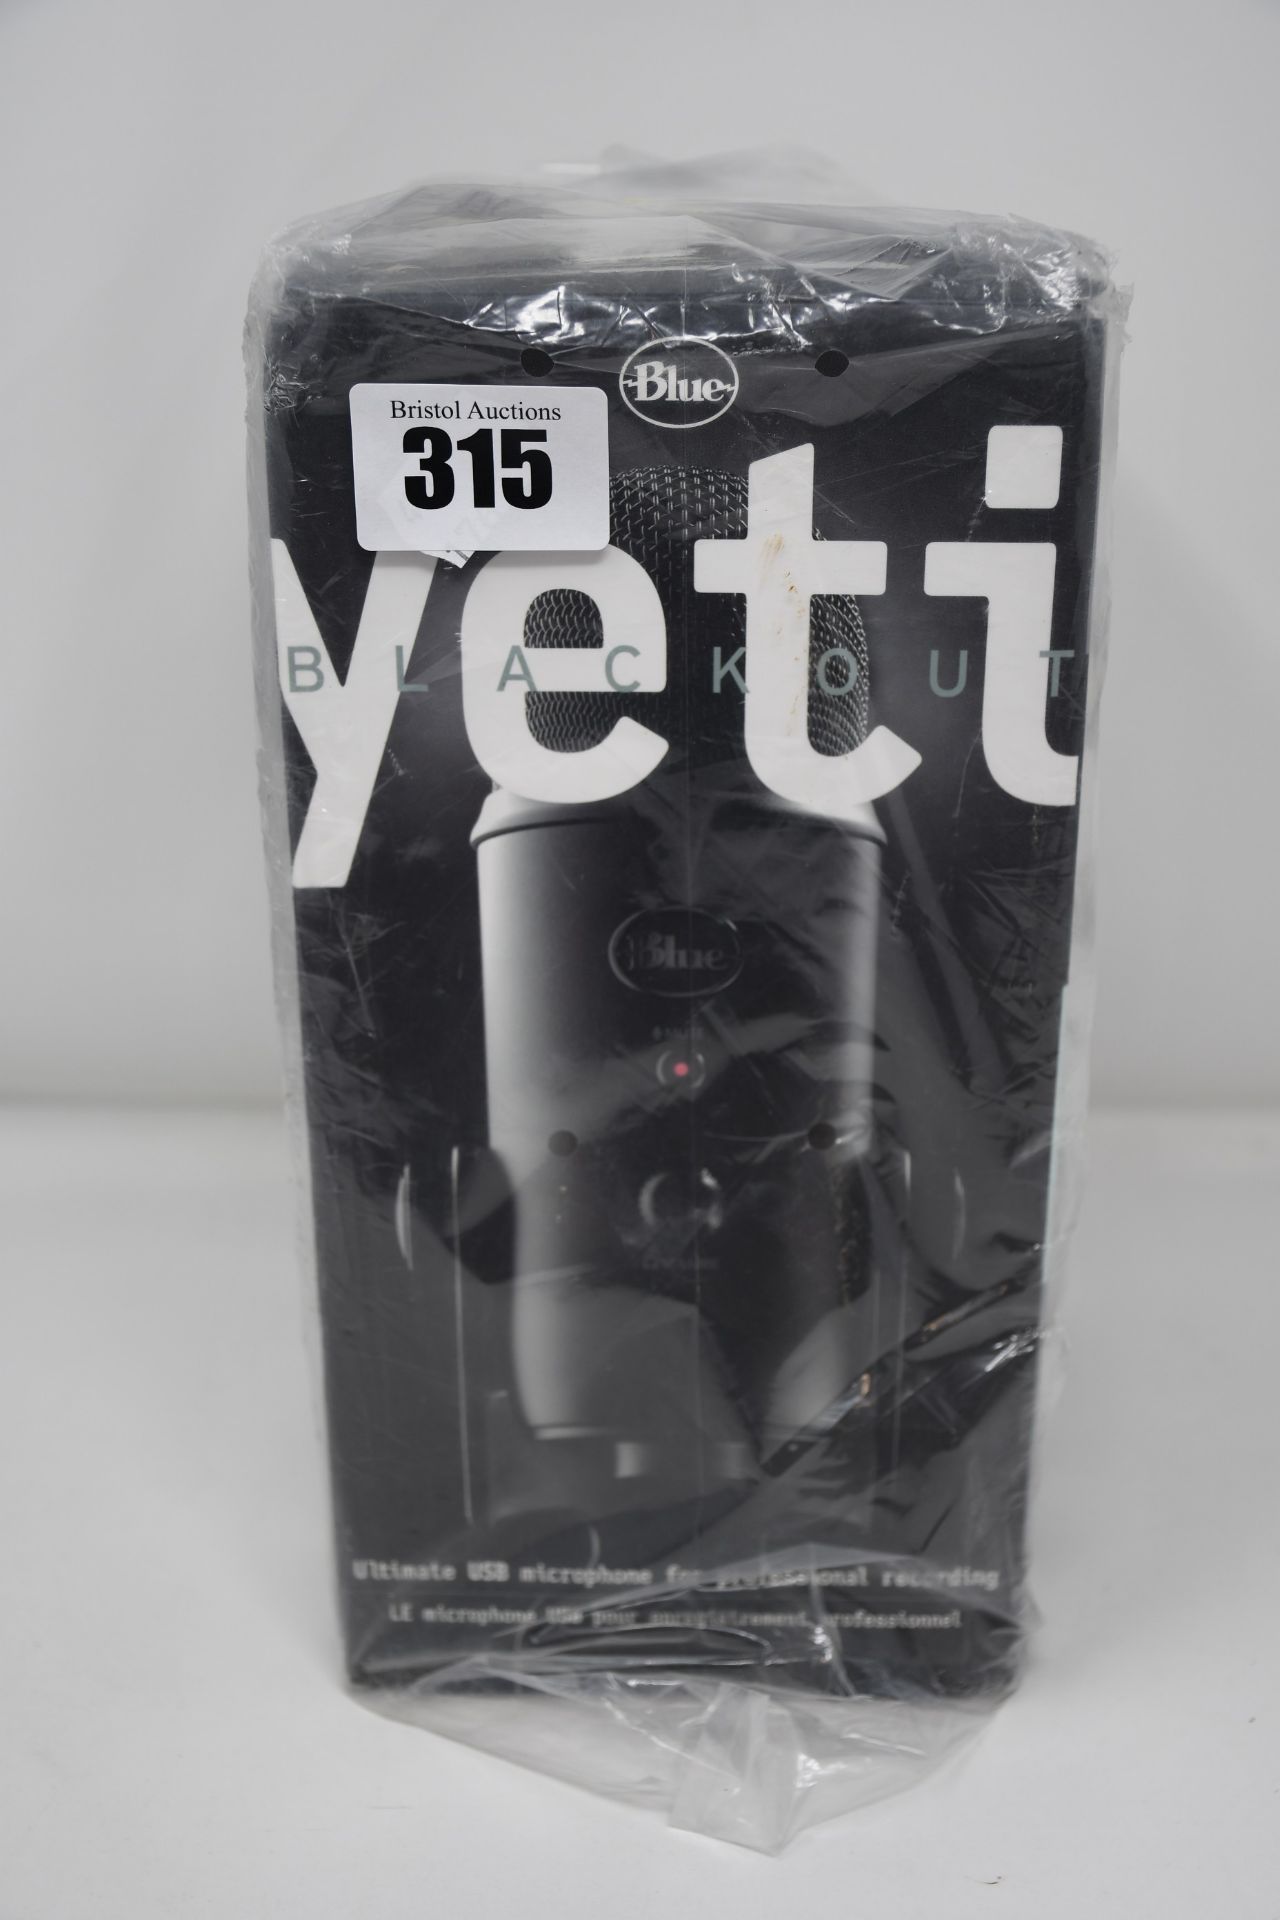 One boxed as new Blue Yeti Blackout USB microphone.